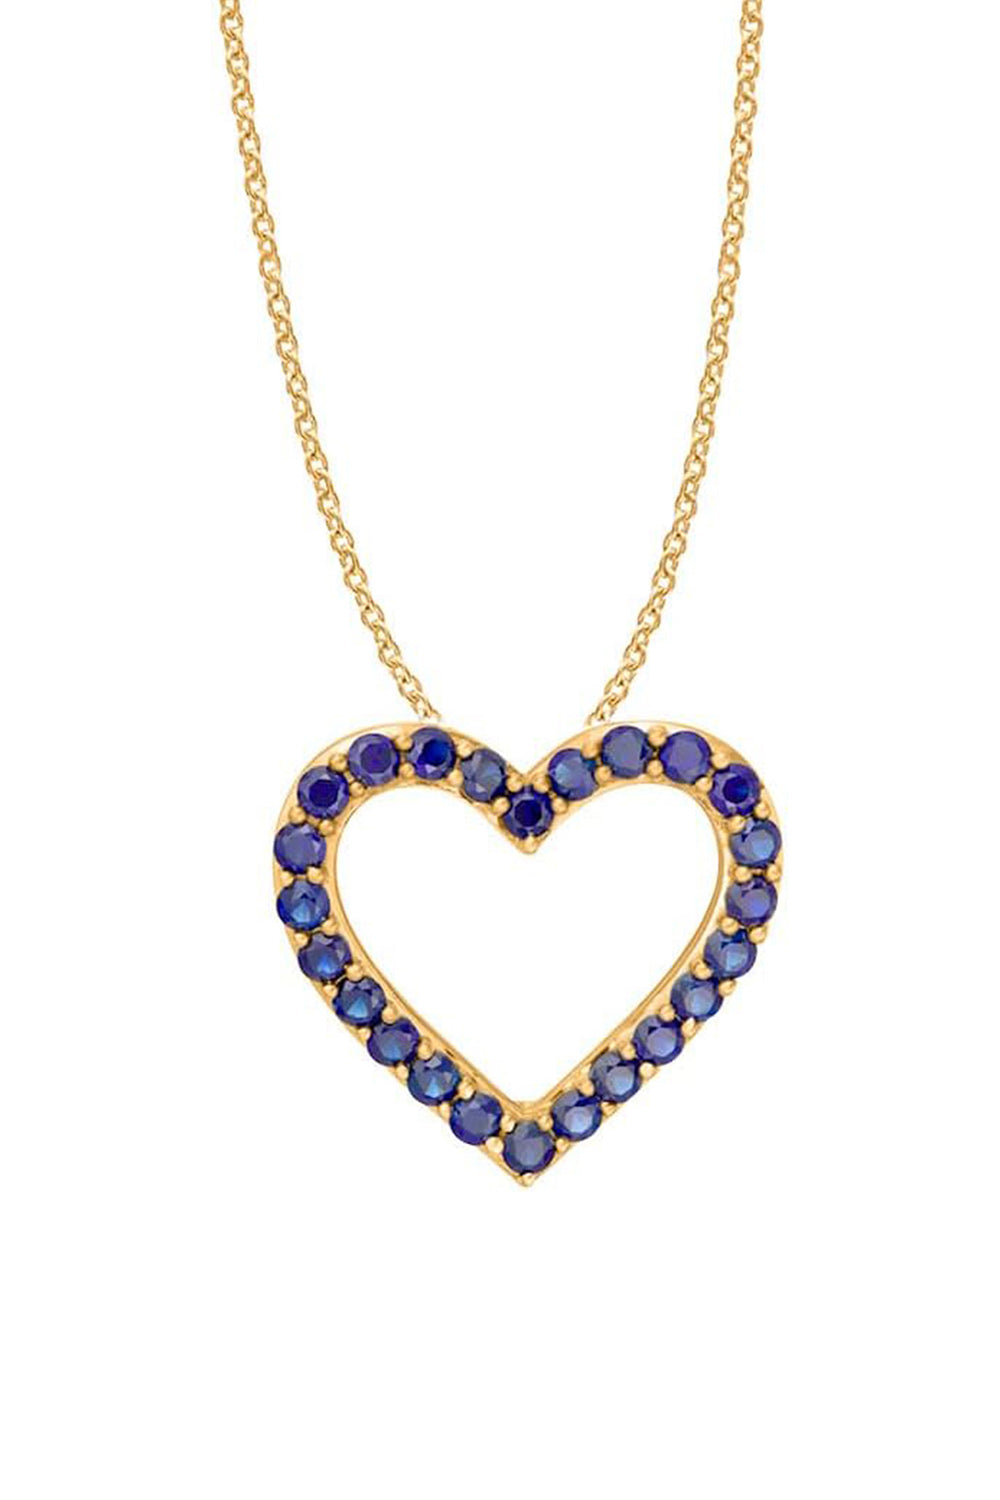 Yellow Gold Chain with Blue Sapphire Open Heart Pendant